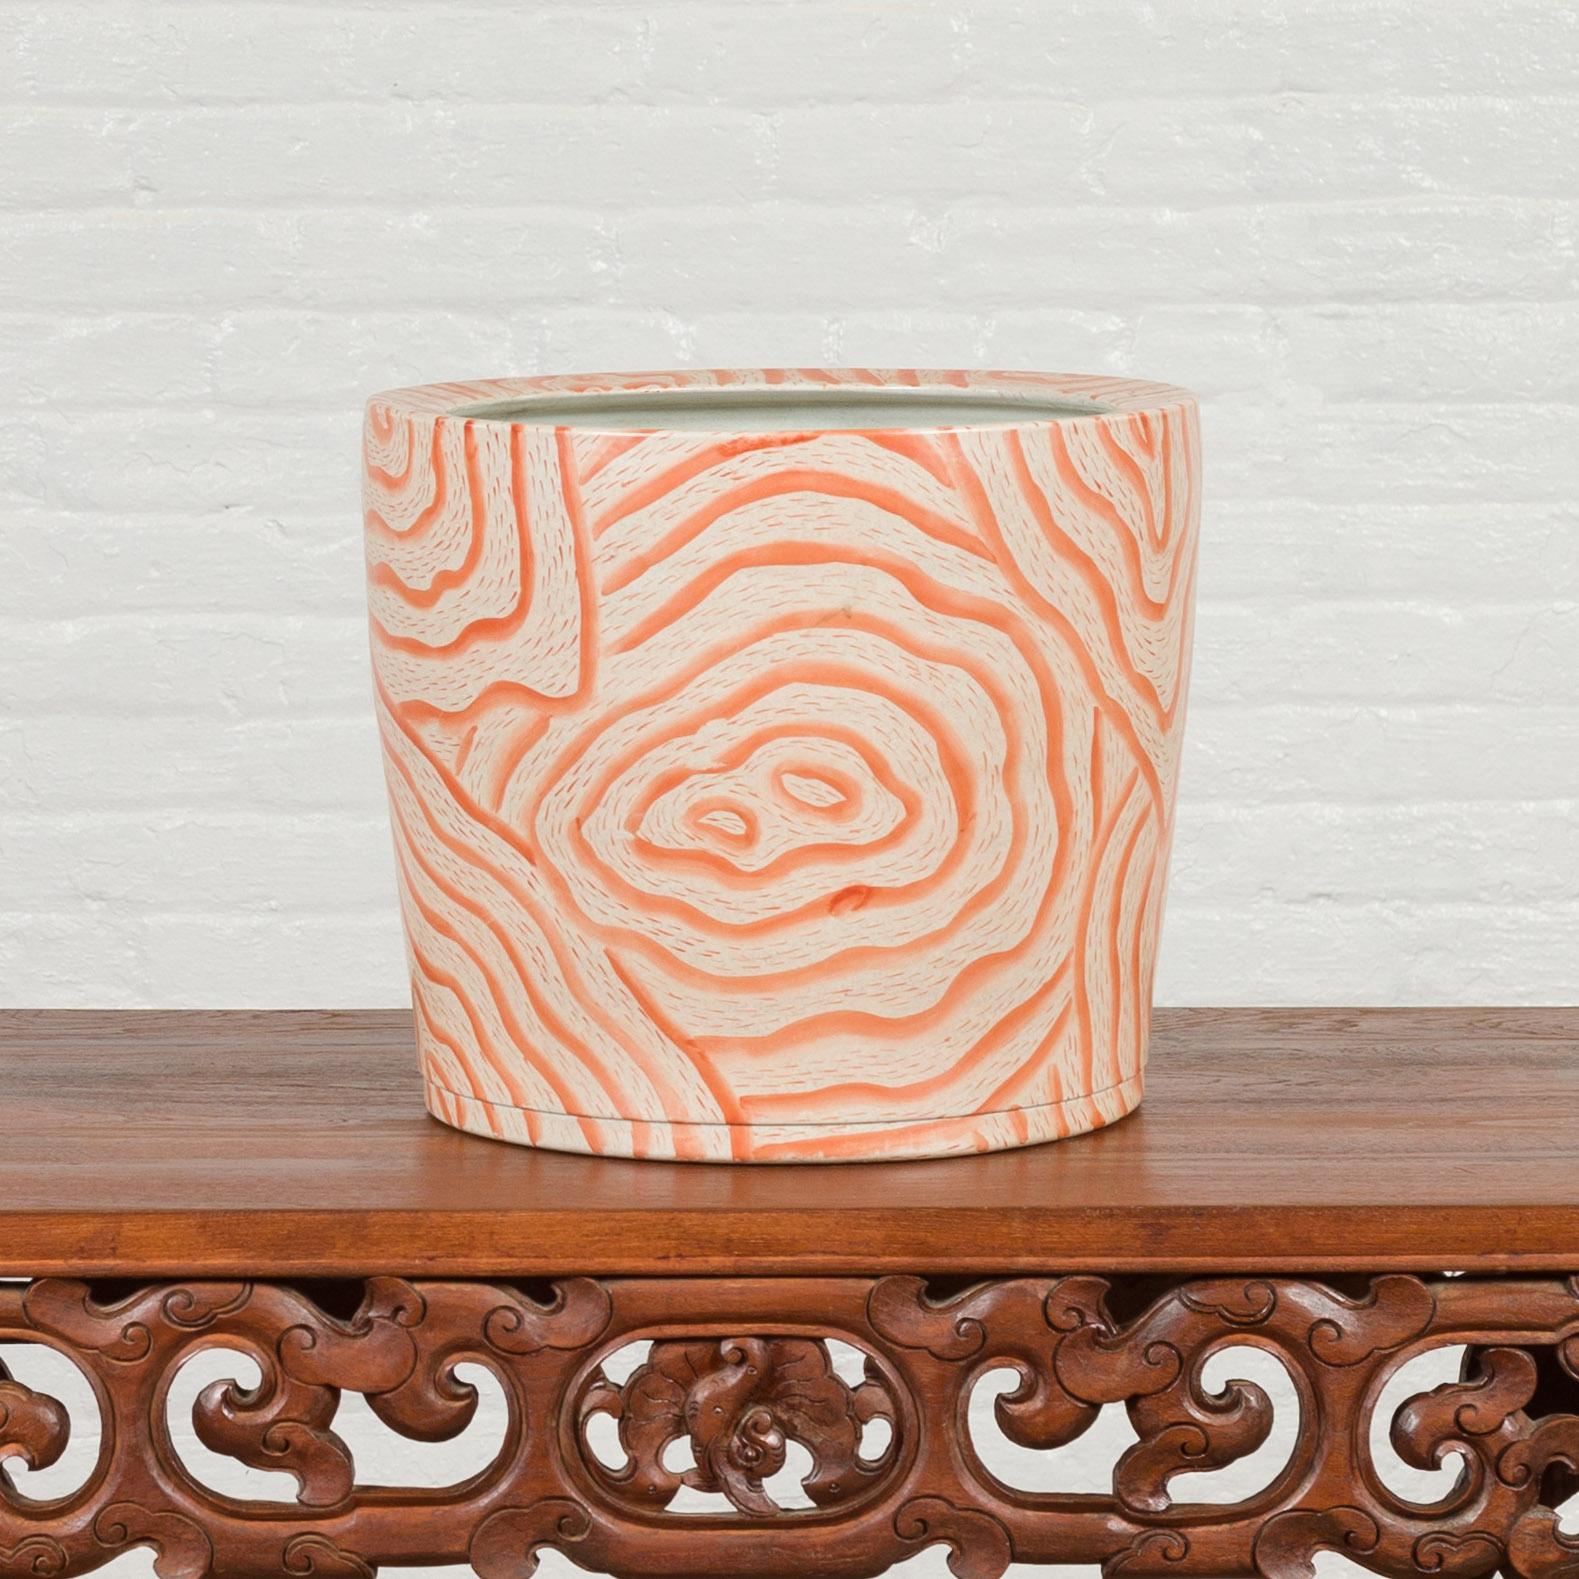 A contemporary Thai salmon colored flower vase with stripes. Crafted in Thailand, this vase features a simple silhouette adorned with a salmon colored decor made of various stripes imitating a cut wood grain. With its sleek lines and subtle colors,